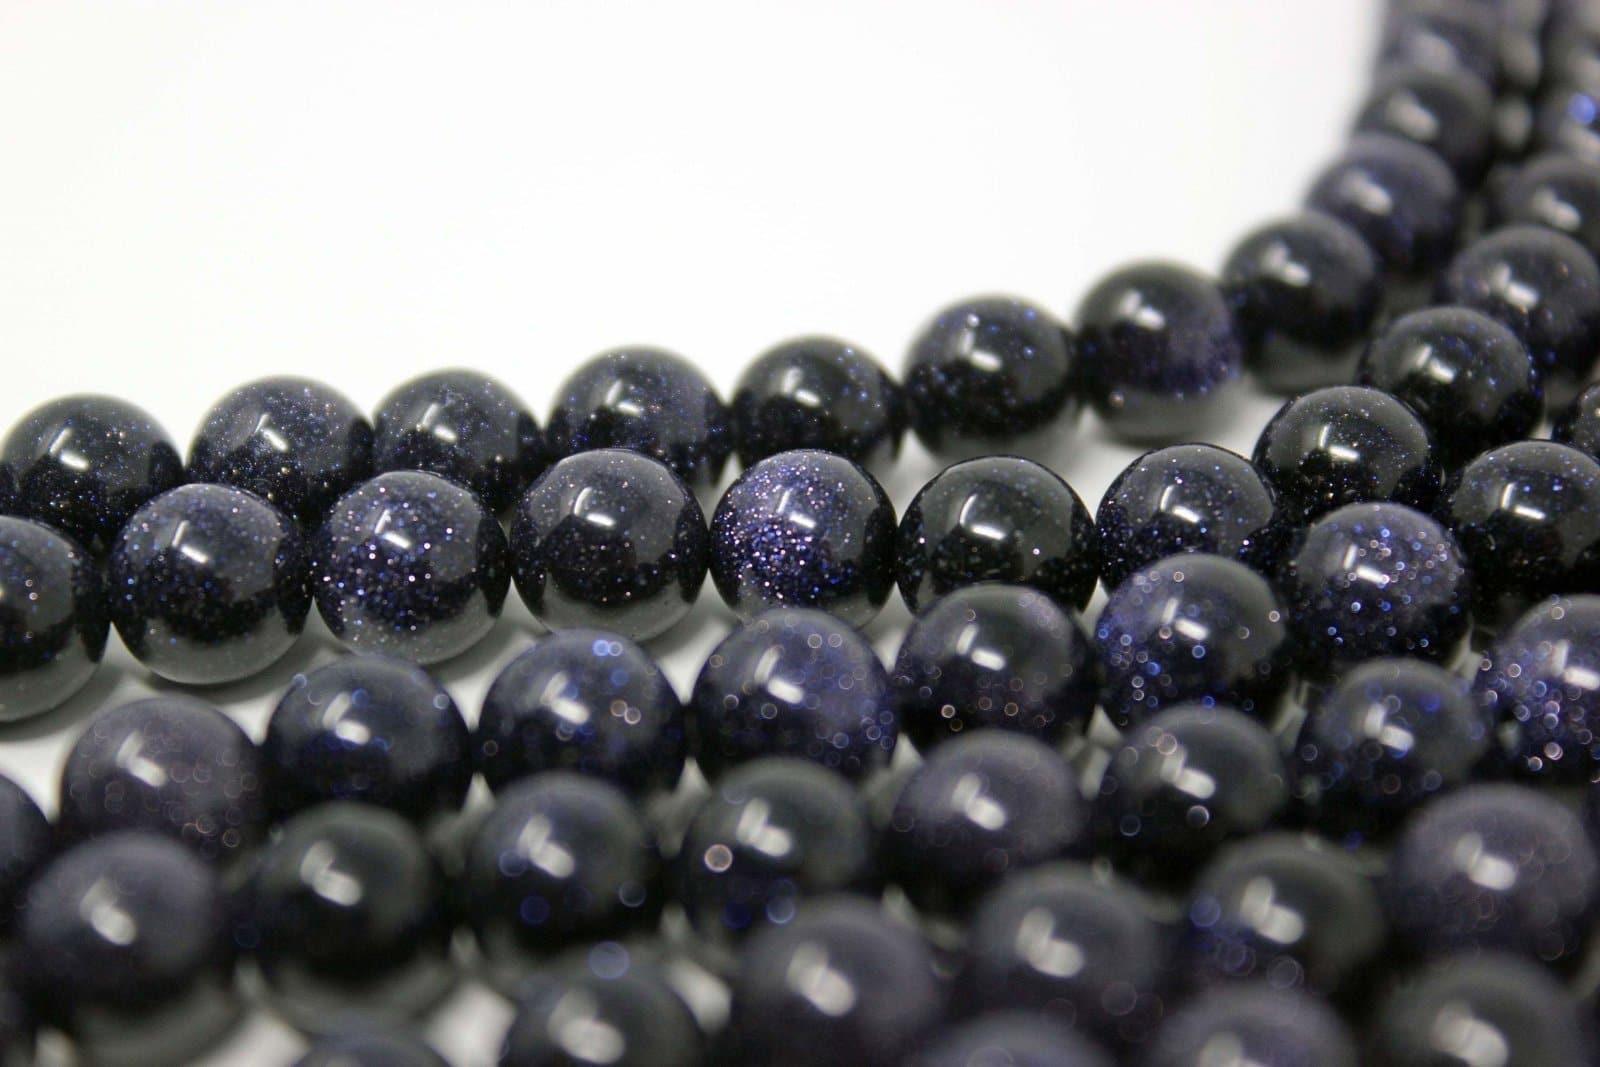 Blue GoldStone Glass 8mm Lapidary Bead 15 Inch Strand! - LapidaryCentral